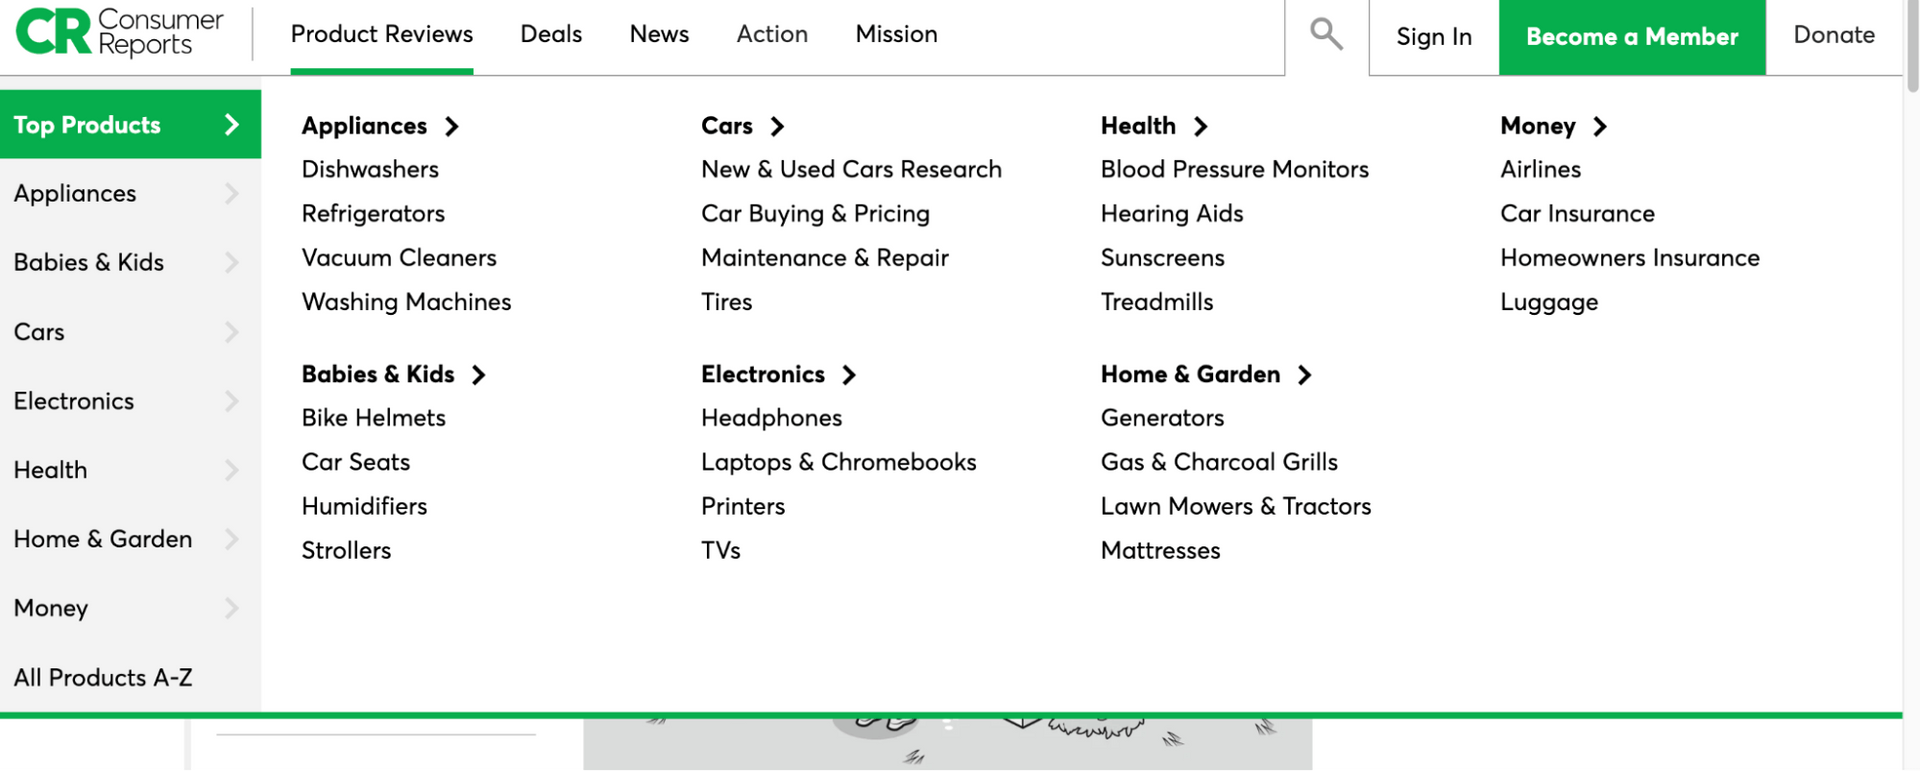 The Consumer Reports homepage with the Top Products tab on the left selected. Subcategories on the page include Appliances and Babies & Kids